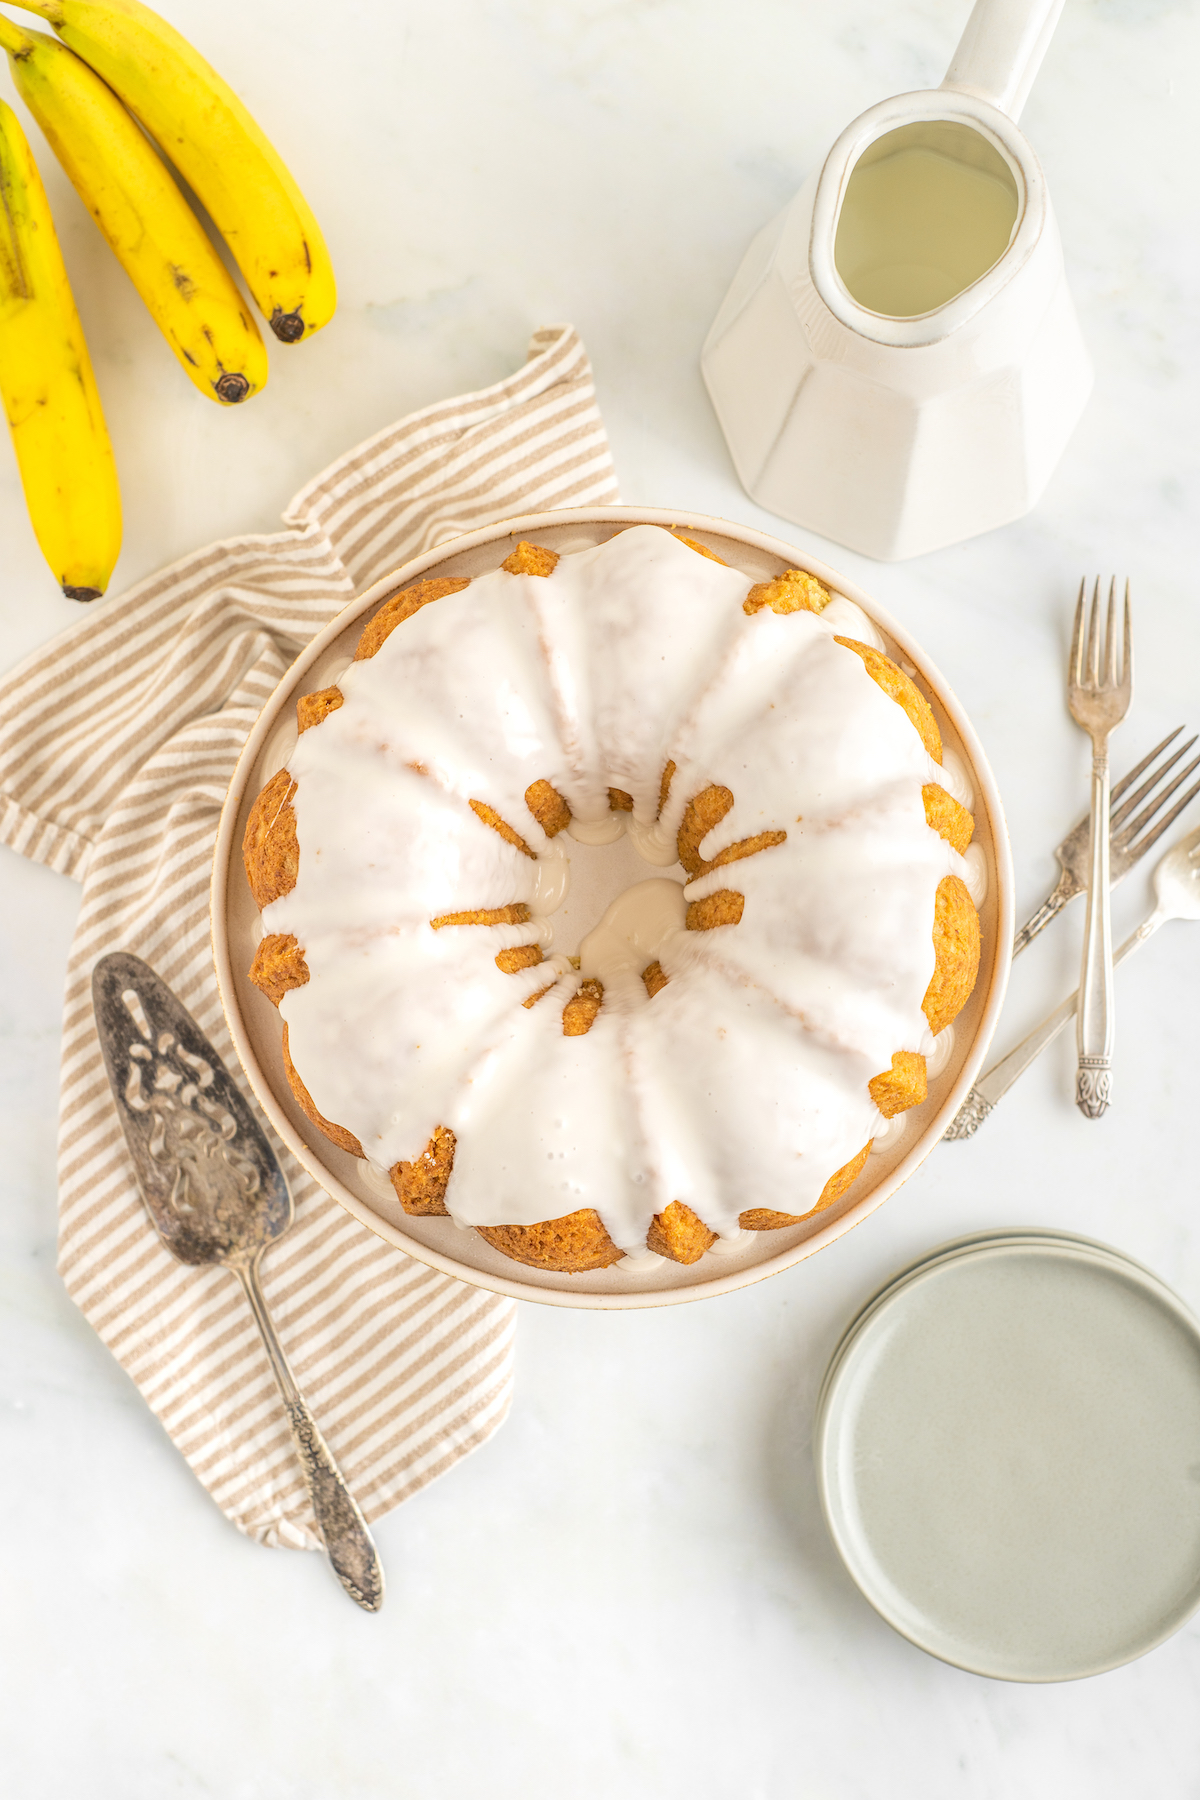 Overhead shot of a bundt cake with creamy icing.